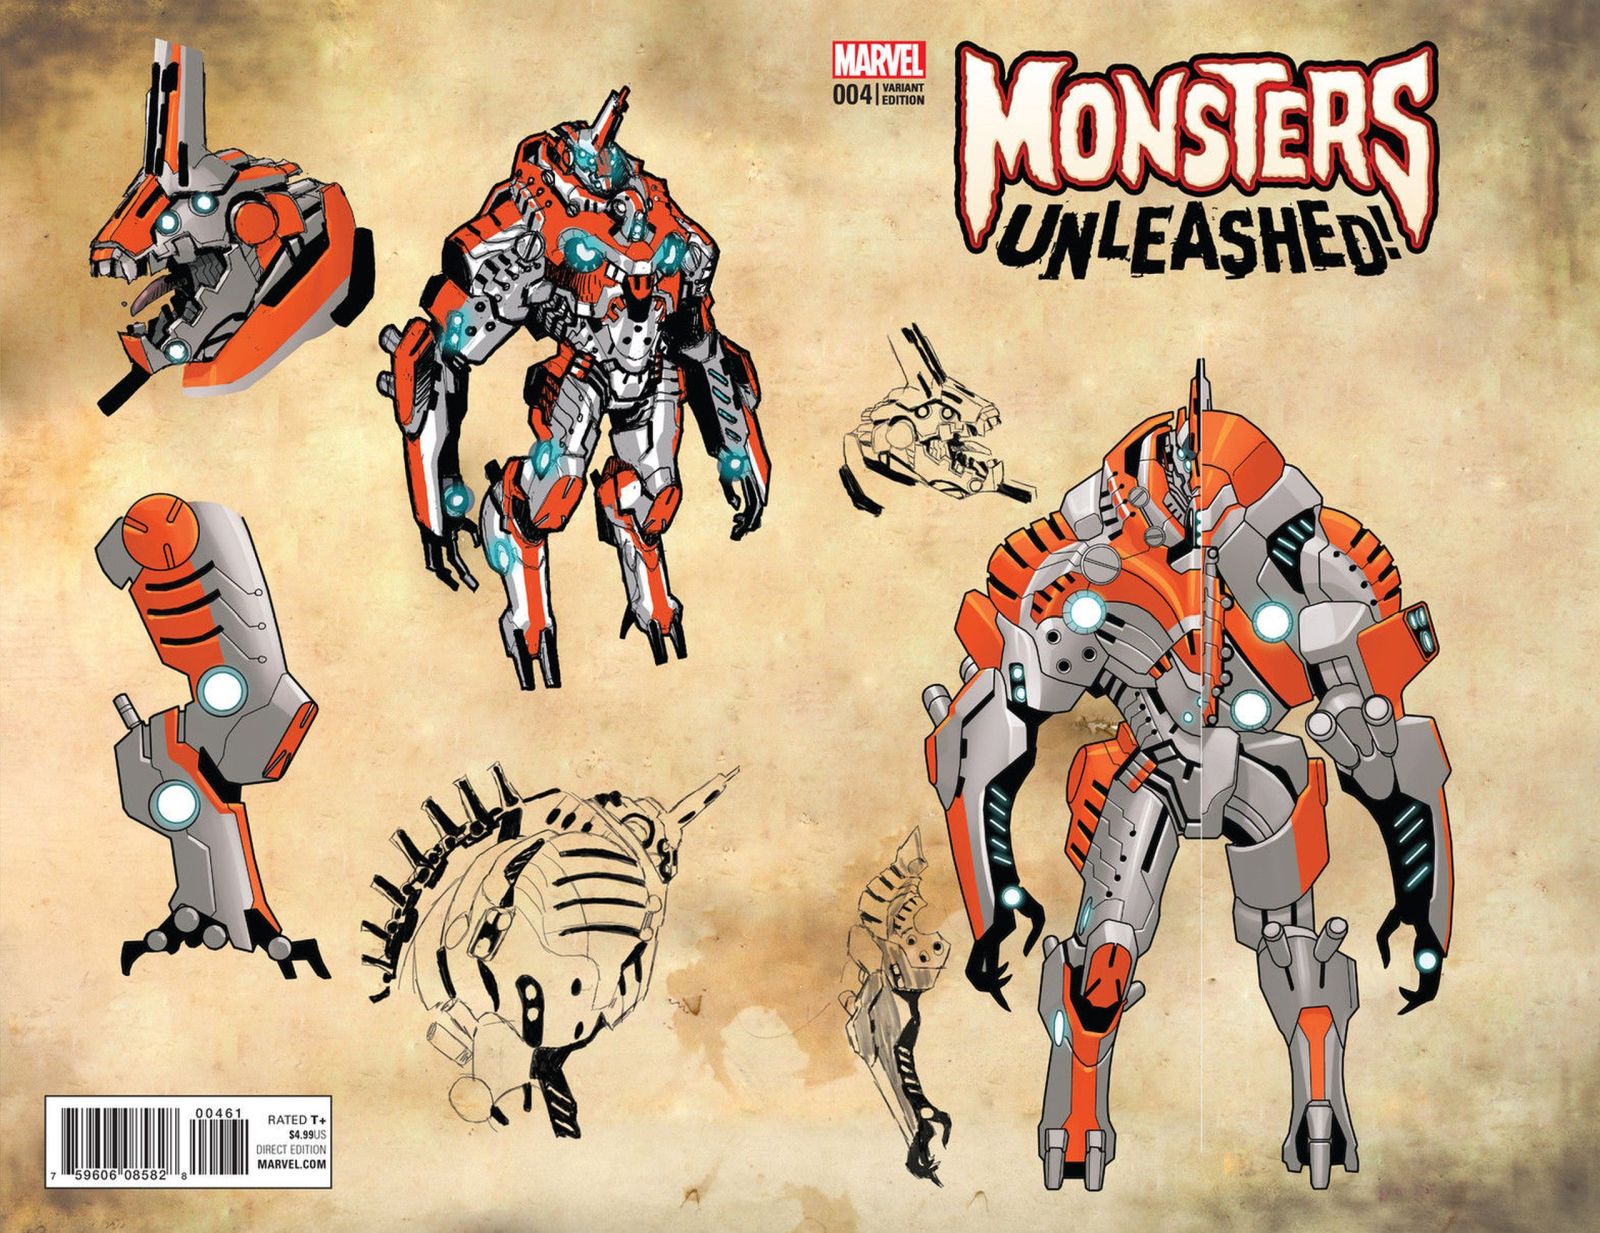 Monsters Unleashed! #4